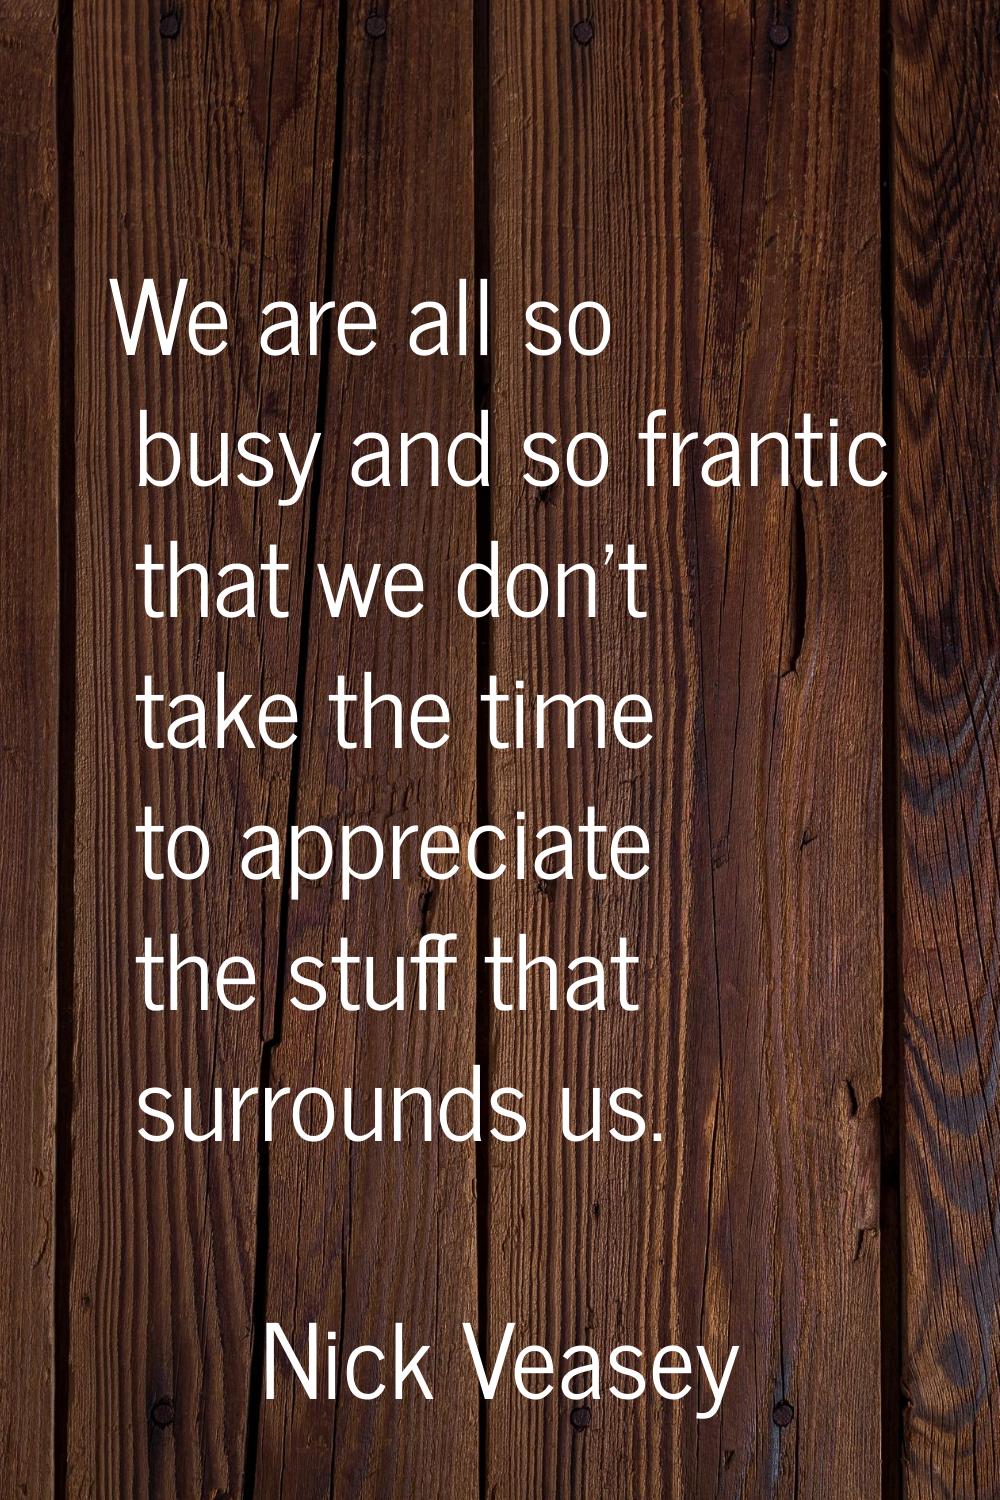 We are all so busy and so frantic that we don't take the time to appreciate the stuff that surround